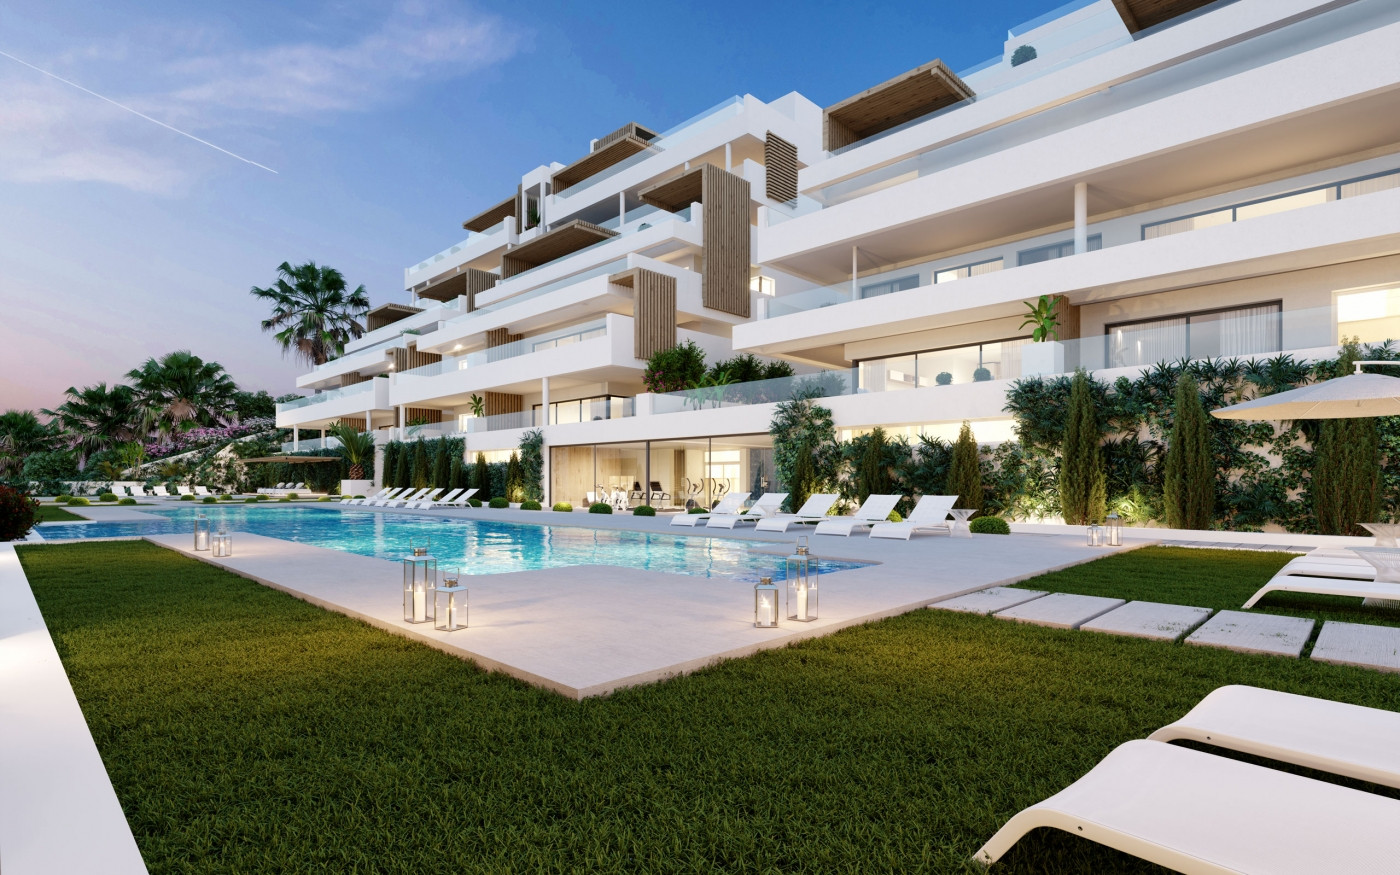 Off plan modern apartments and penthouses for sale in Estepona